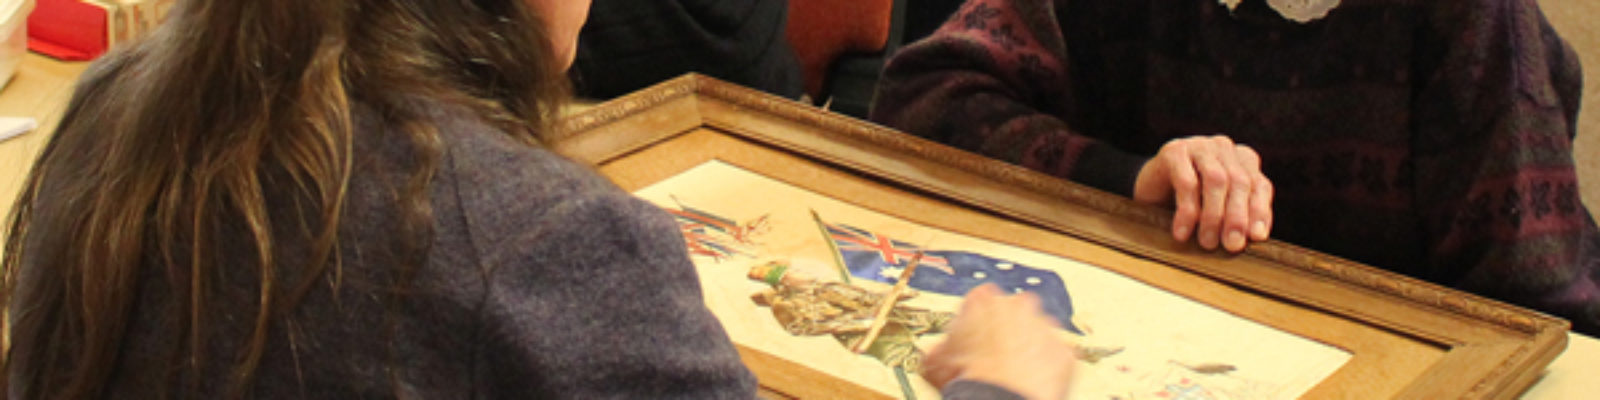 People around a table looking at a framed work.